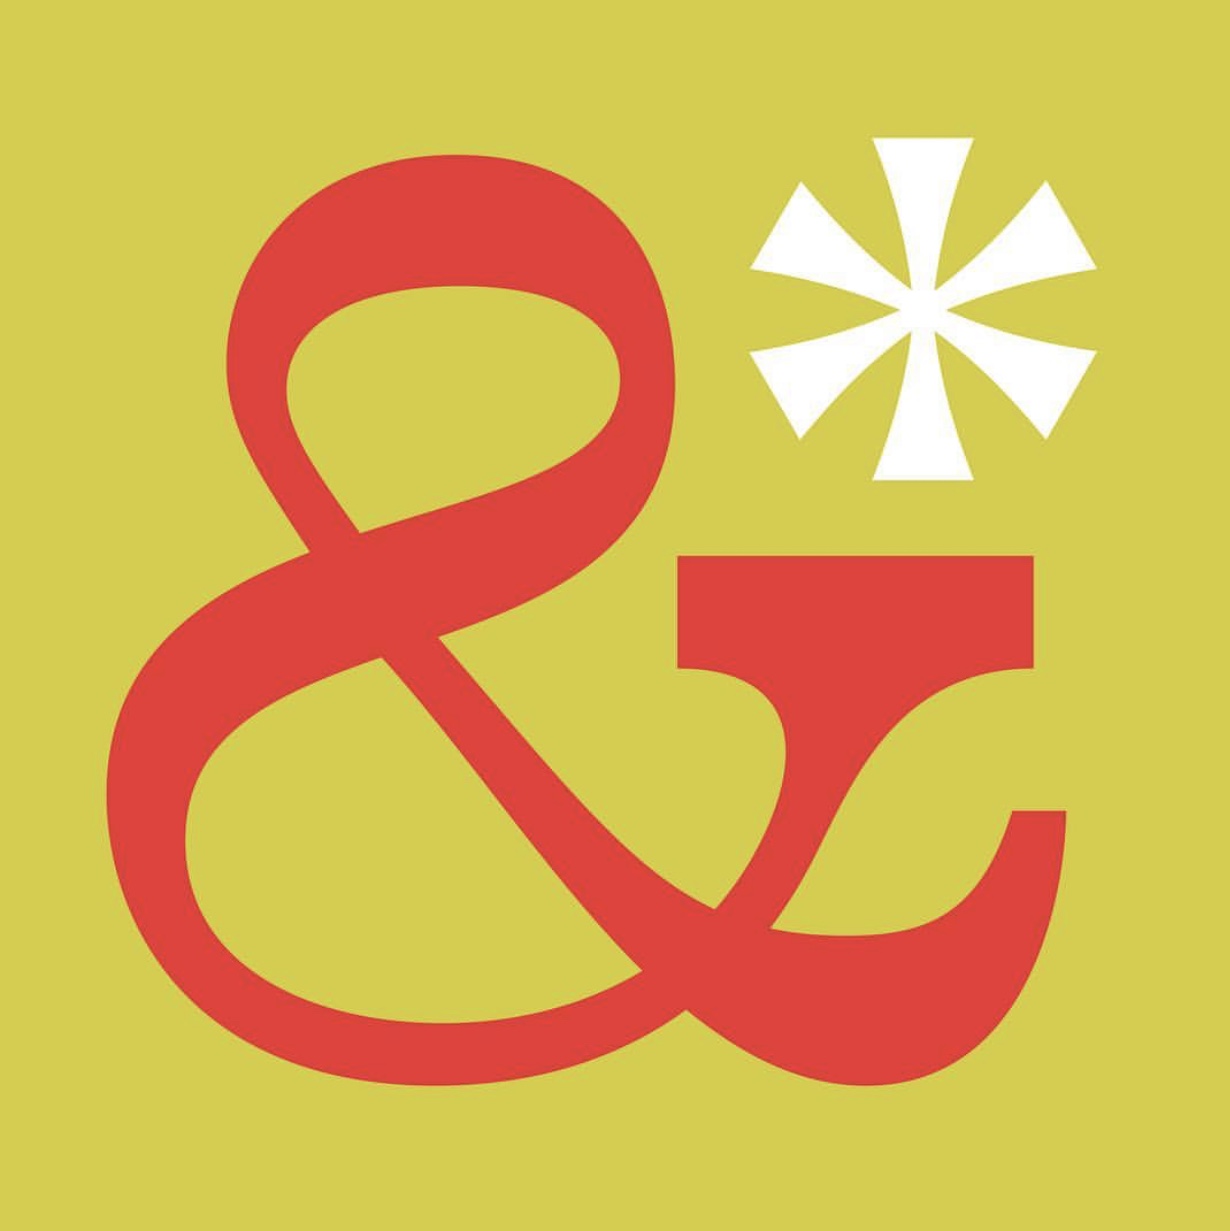 Red ampersand on green/yellow background with white asterisk